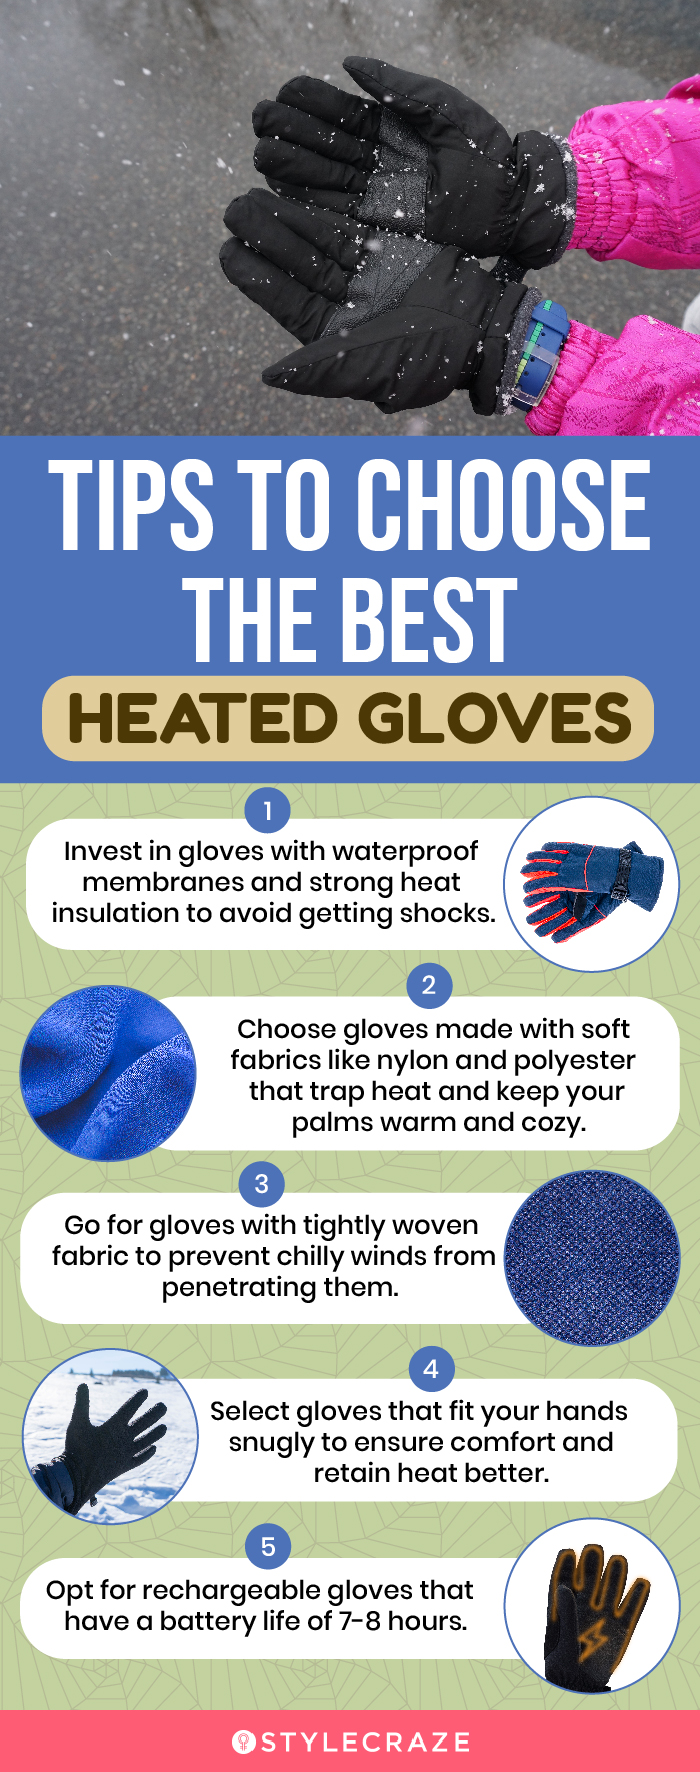 Tips To Choose The Best Heated Gloves (infographic)